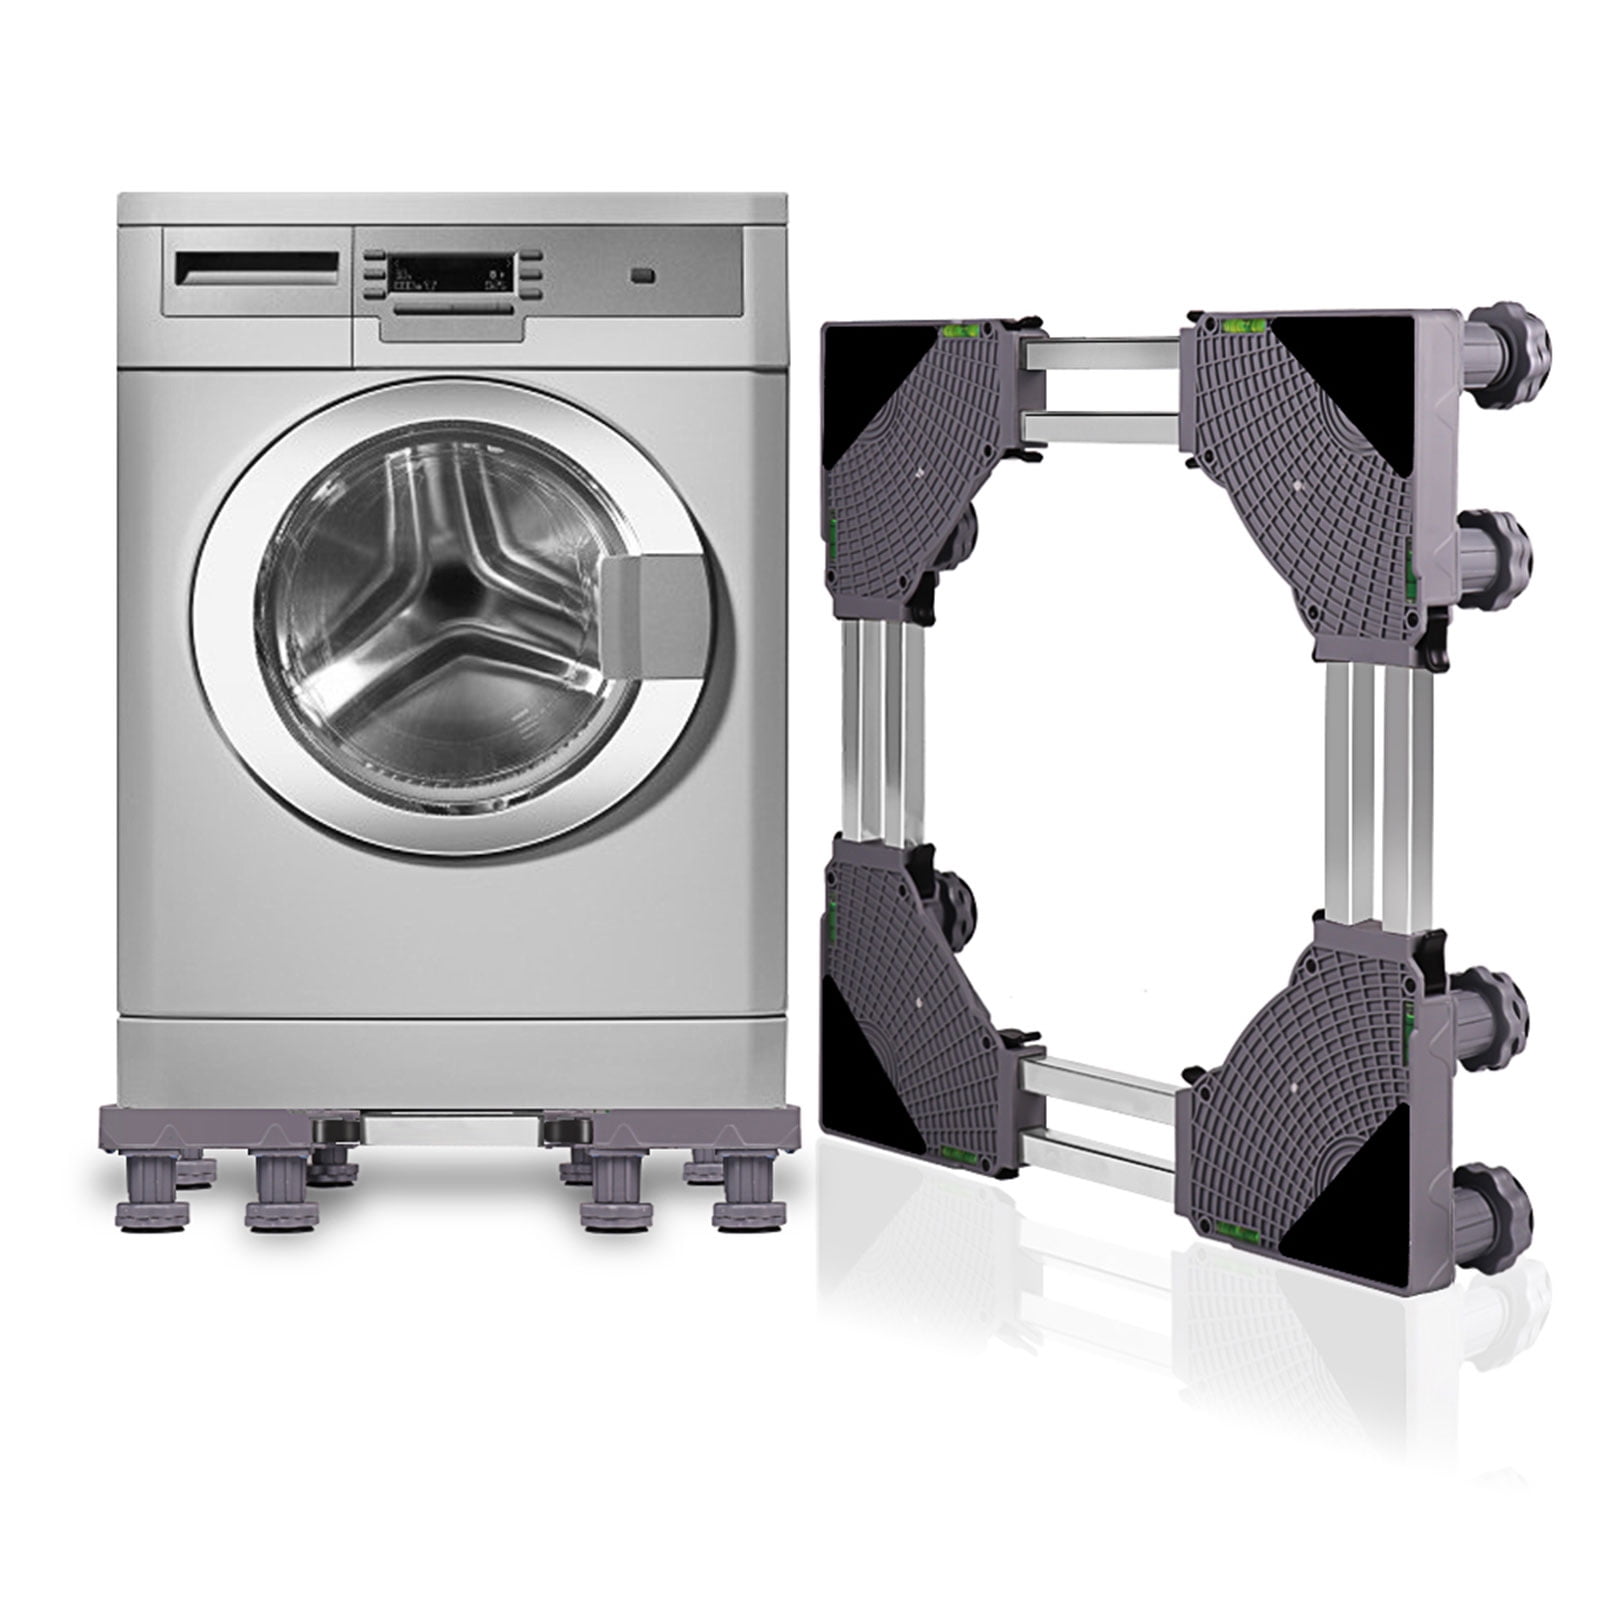 4/8 Feet Adjustable Foot Washing Machine Bottom Bracket Can Be Padded at The Bottom of The Washing Machine for Easy Movement #2 Washing Machine Stand